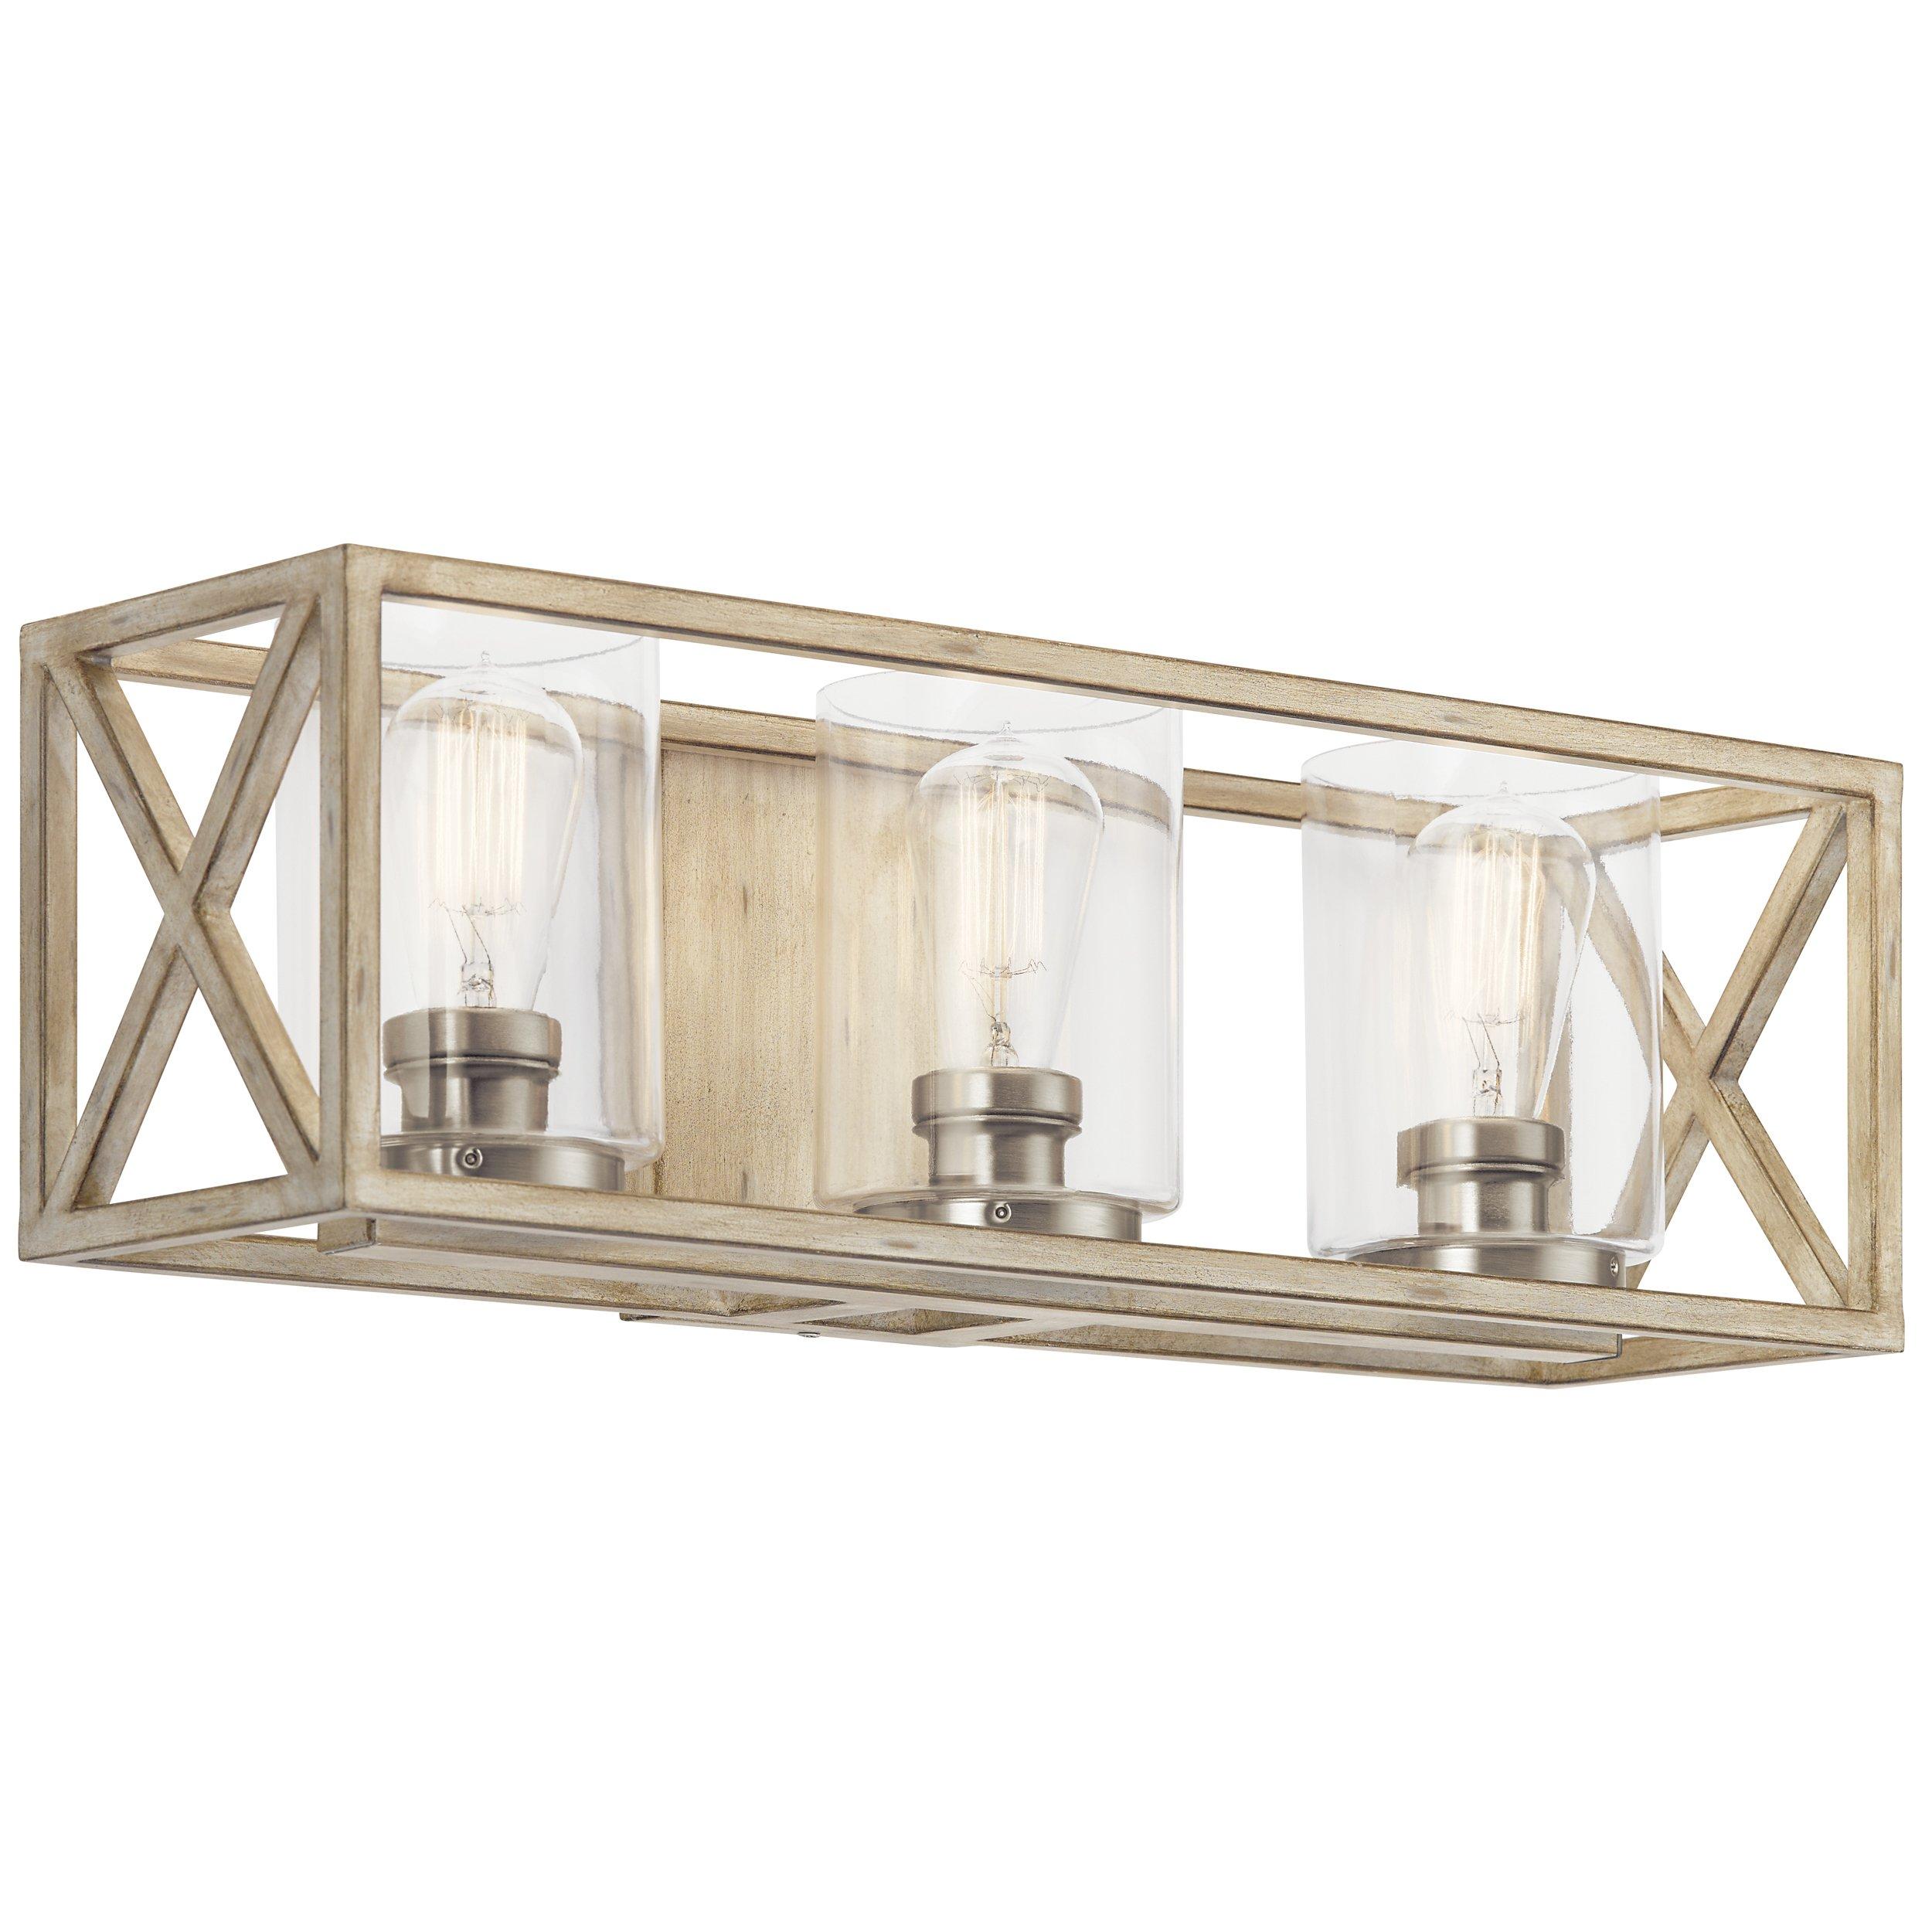 Moorgate Distressed Antique White Triple Sconce